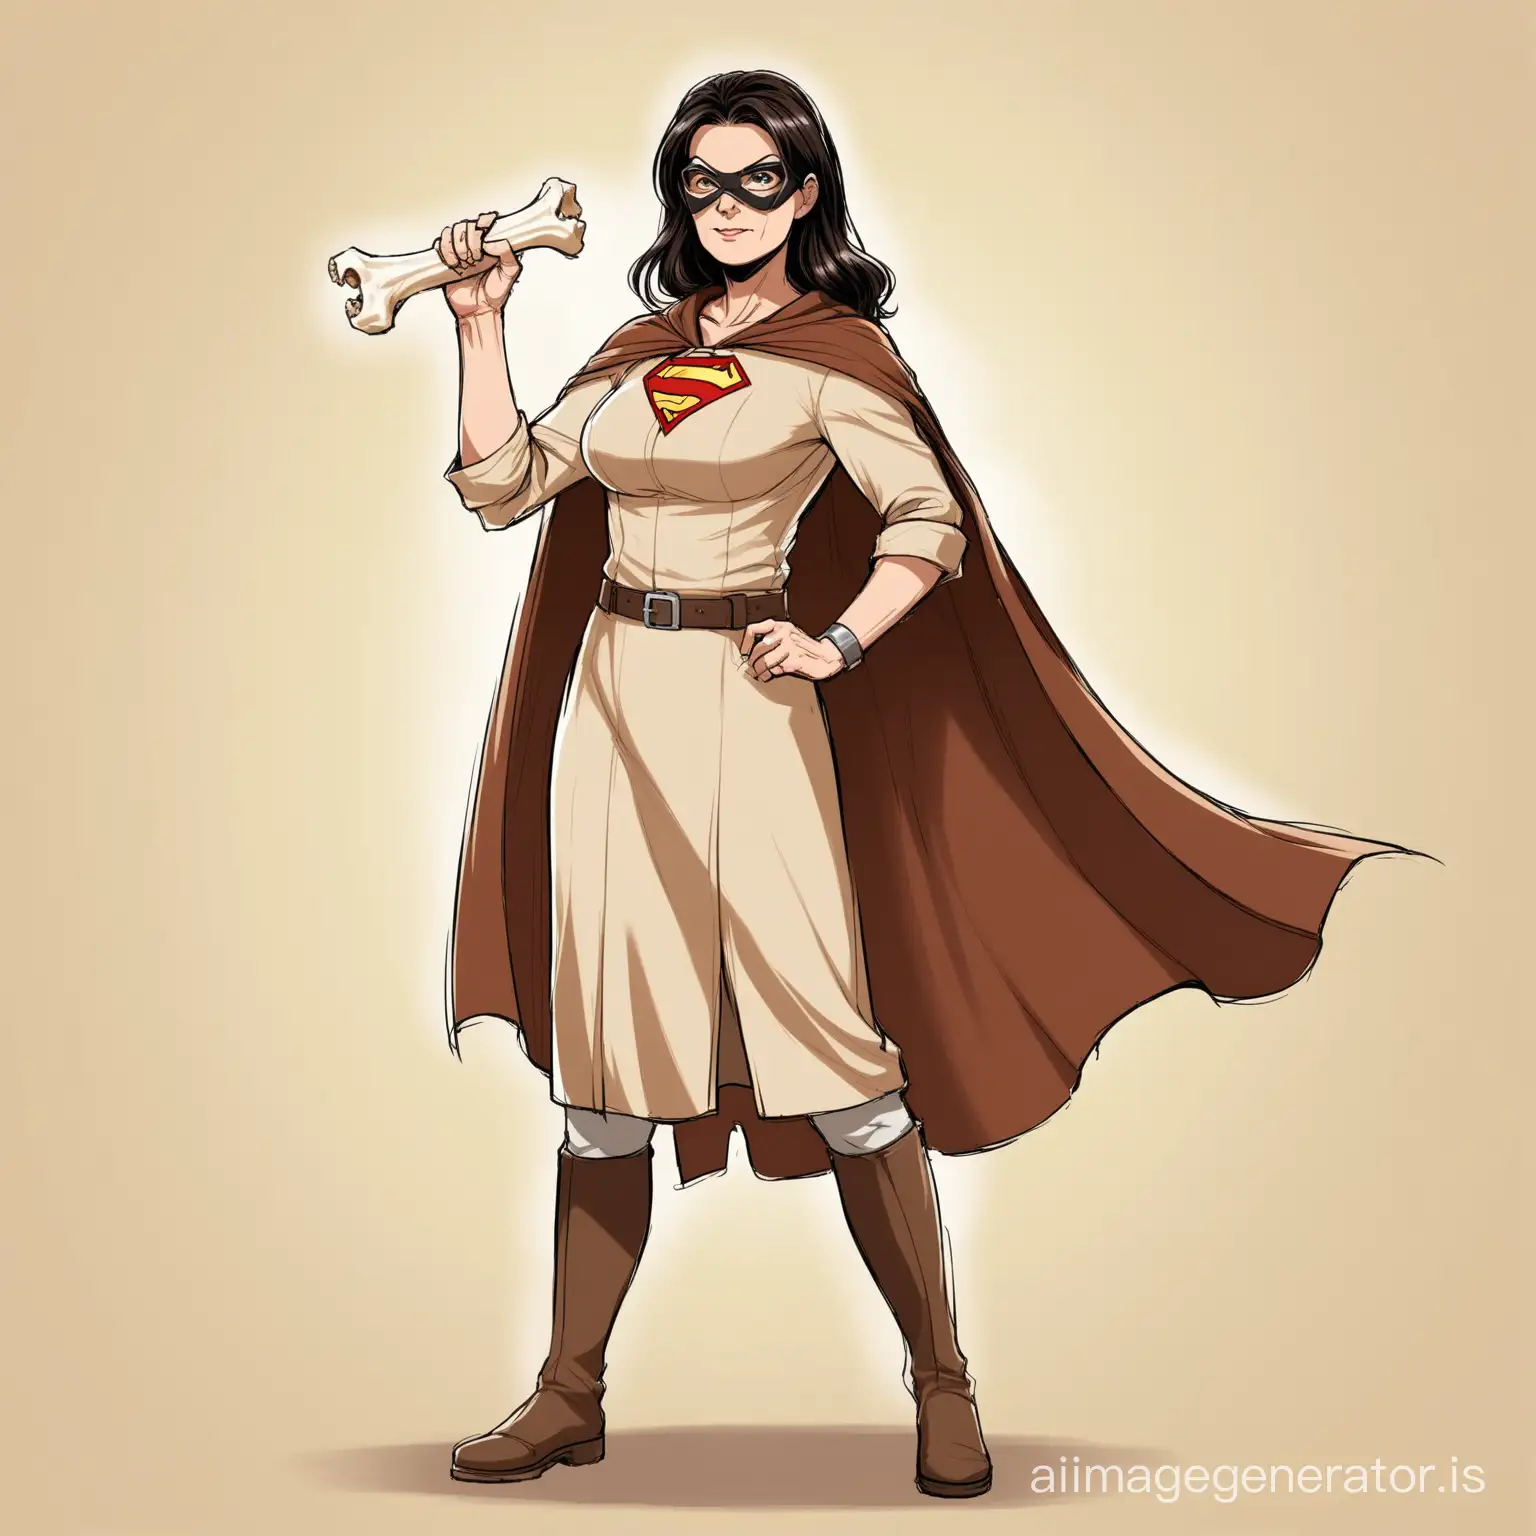 50 year Old female archaeologist with dark hair holding a bone dressed as a superhero